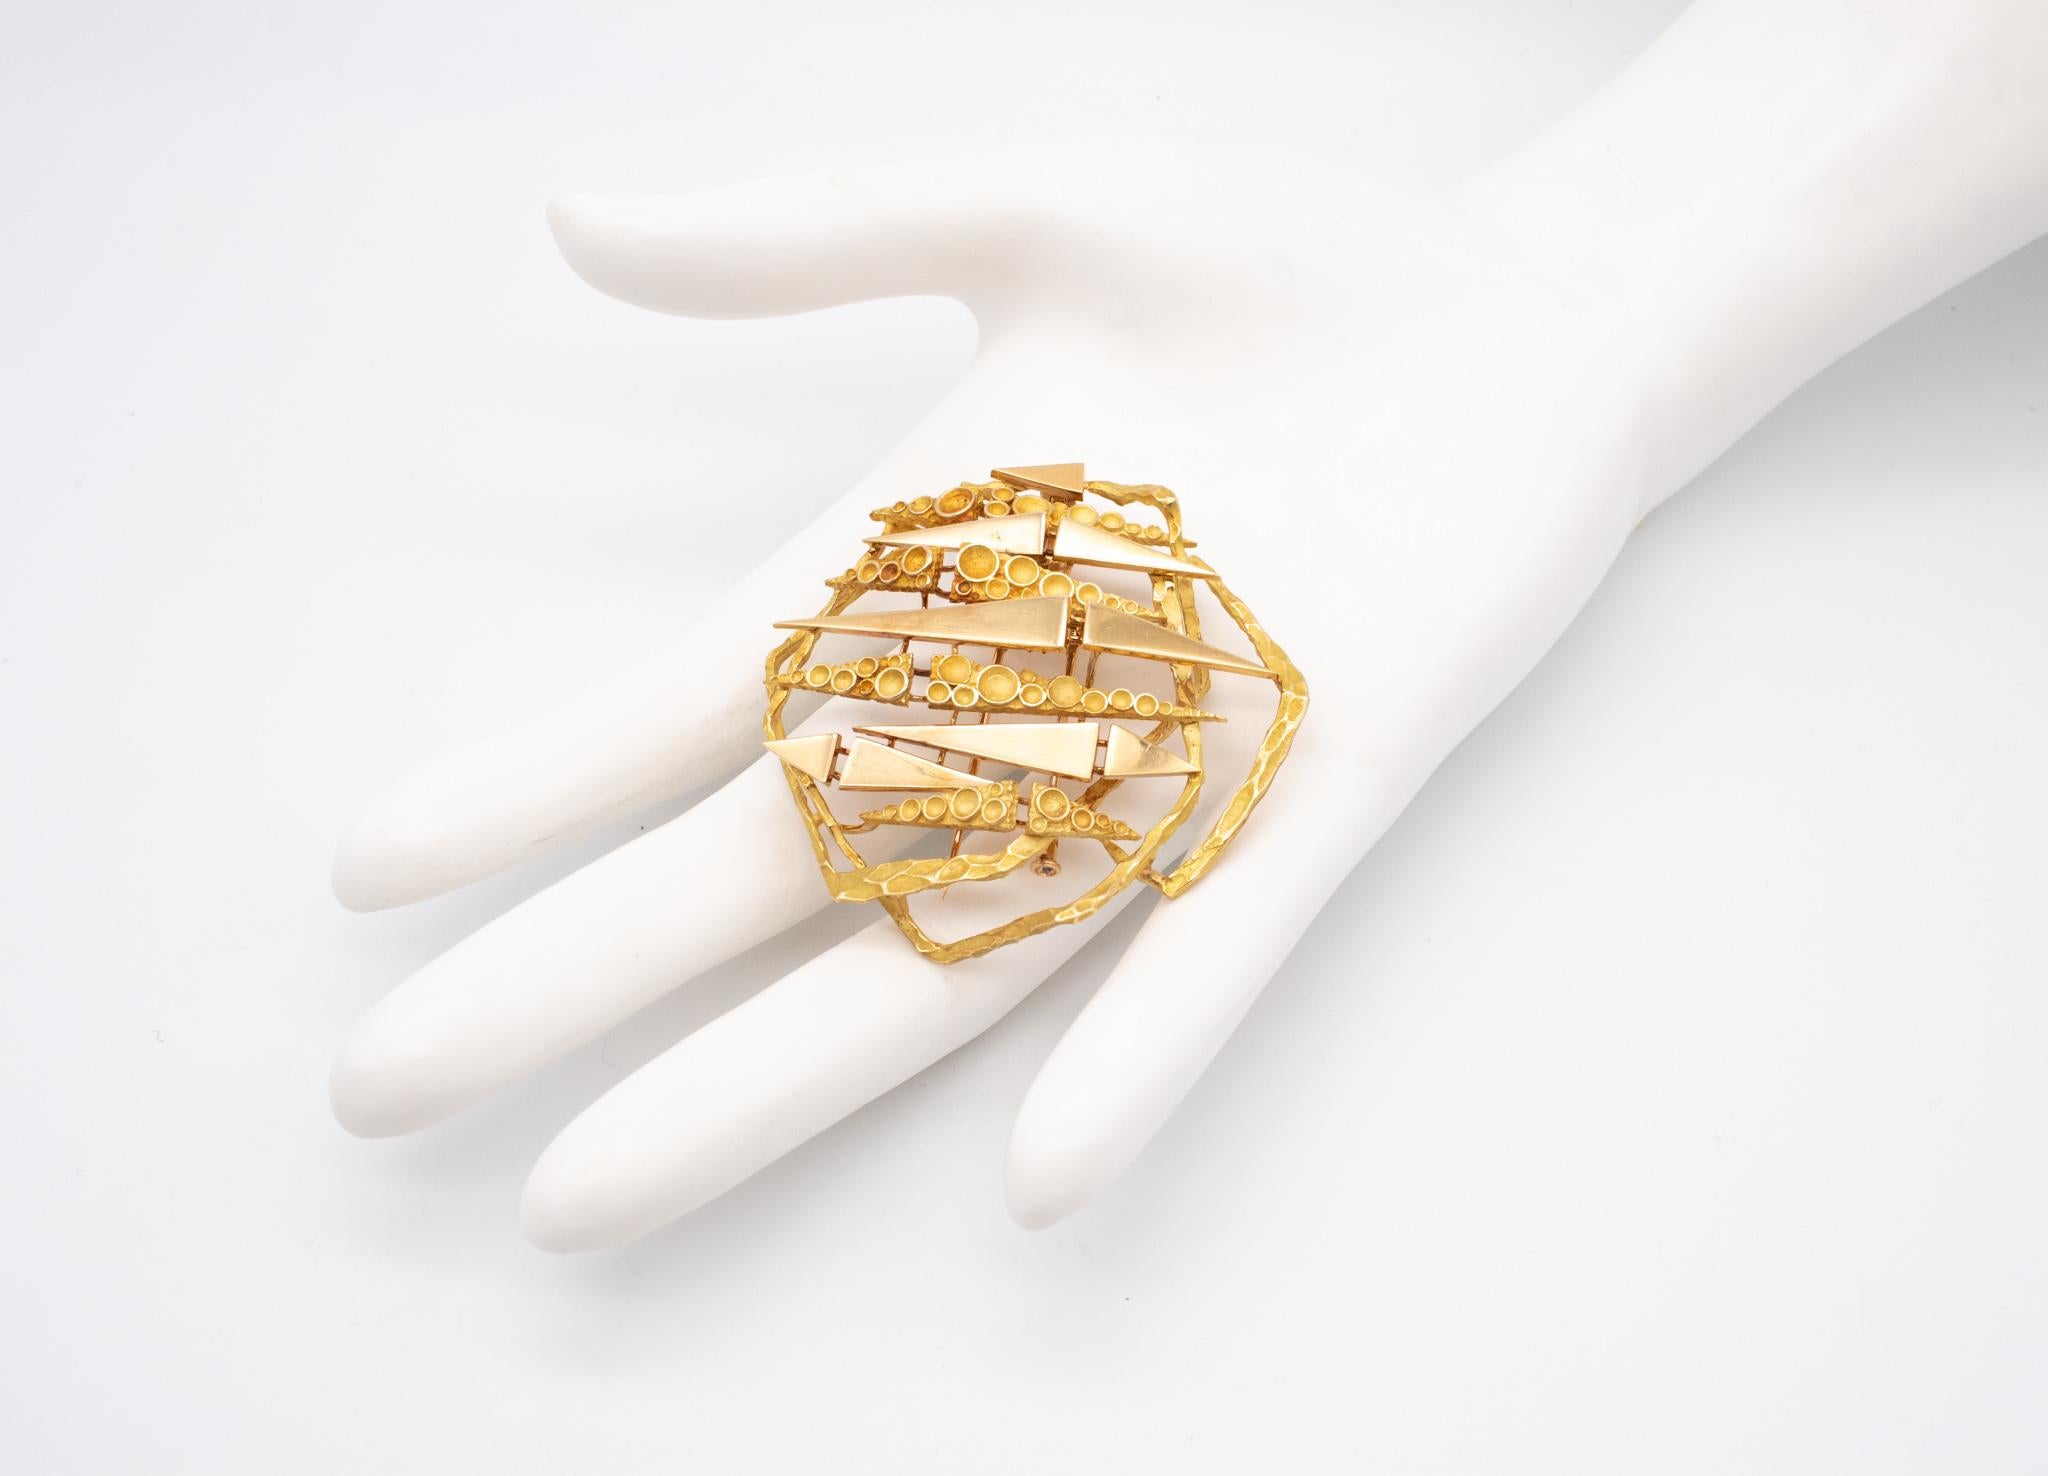 Modernist pendant-brooch designed by Kutchinsky.

Beautiful geometric pendant-brooch created in London, United Kingdom by the famous house of Kutchinsky, circa 1960's. It was crafted in solid yellow gold of 18 karats, with polished and textured